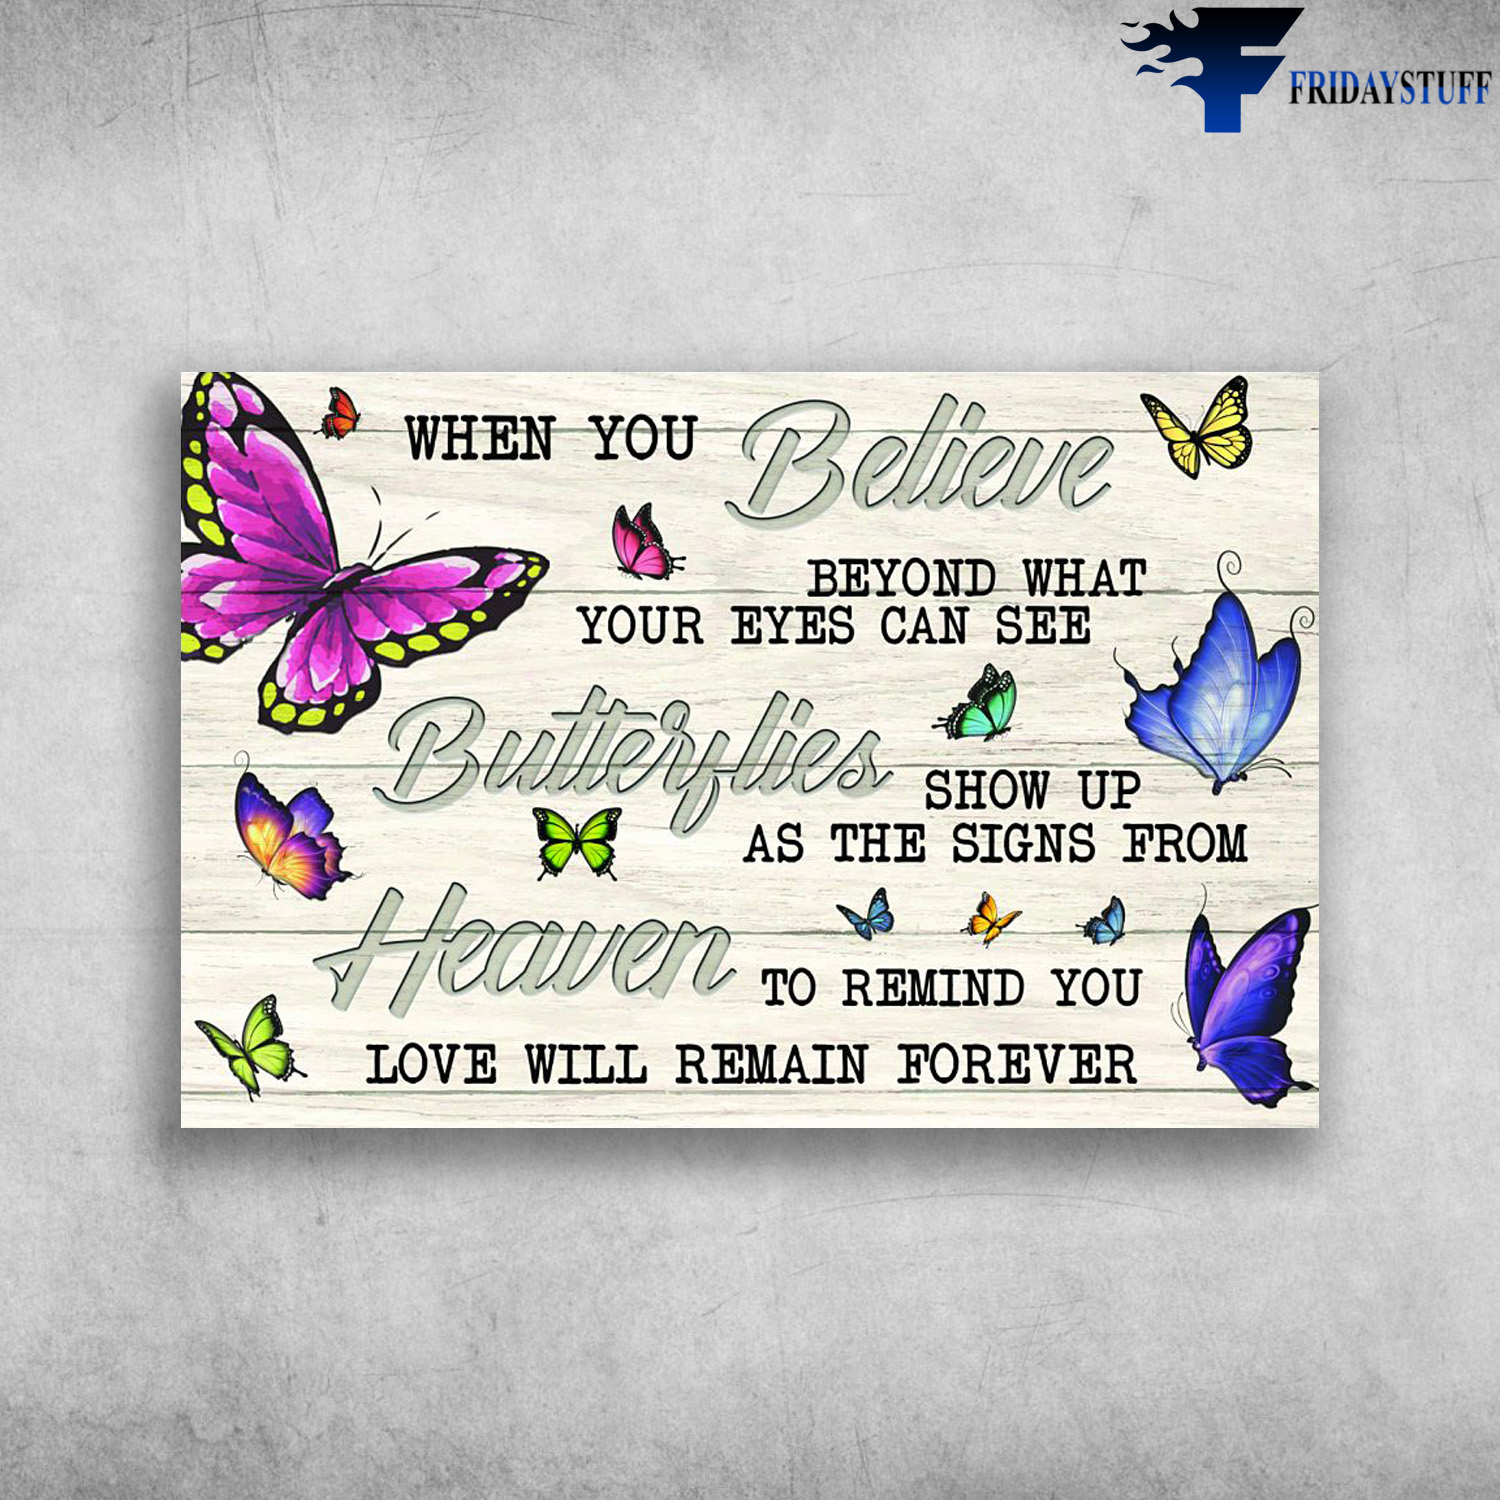 The Butterfly - When You Believe, Beyond What Your Eyes Can See, Butterflies, Show Up As The Signs From Heaven To Reminf You, Love Will Remain Forever